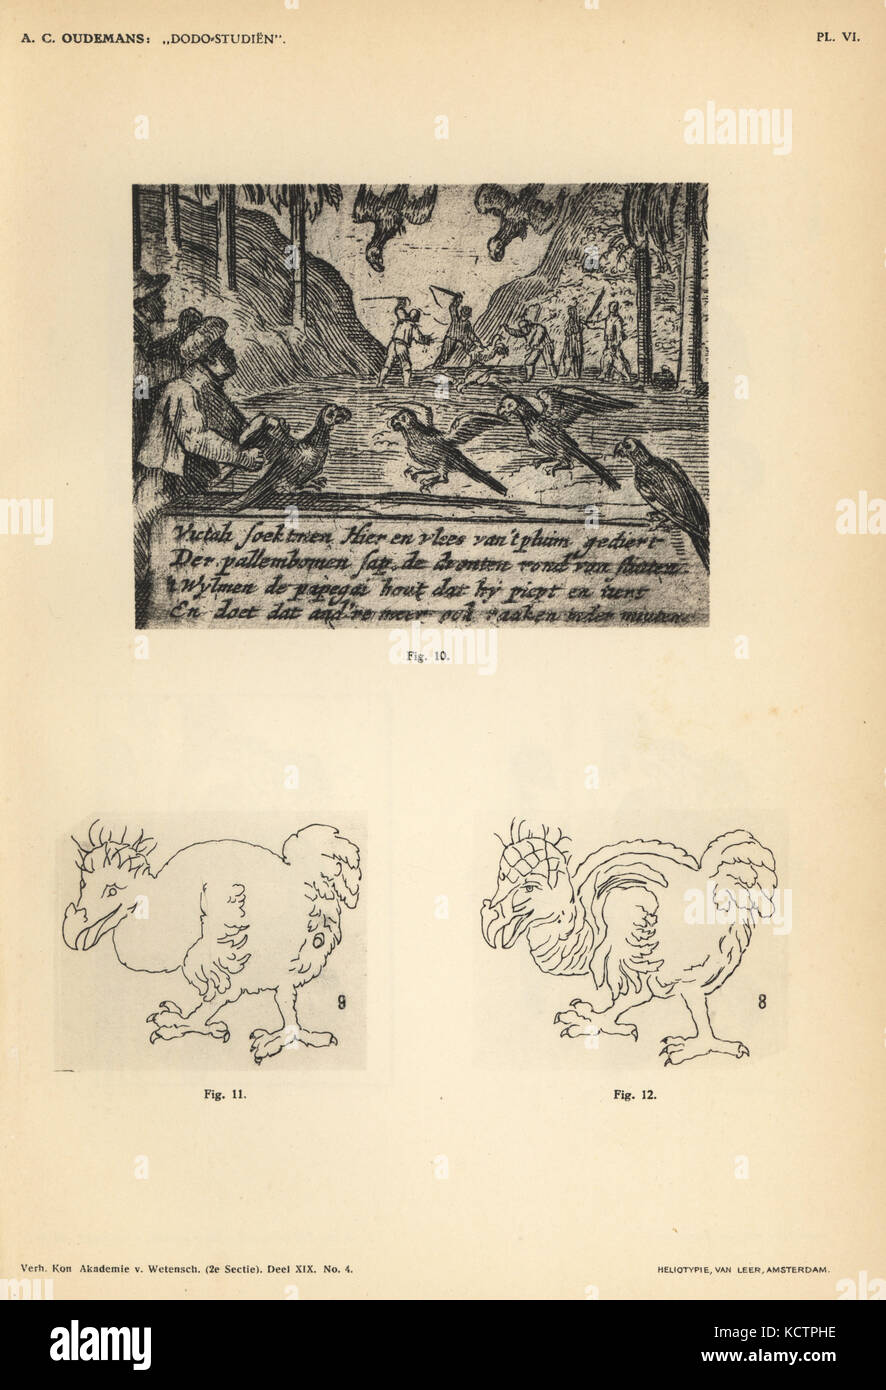 Dodos and parrots hunted in Mauritius 1602 from Willem van West-Zanen’s Journal, and copies of Salomon Savery's white dodo by Abraham and Jan de Wees, 1651 and Gillis Joosten Saeghman, 1665. Heliotype by Van Leer from Dr. Anthonie Cornelis Oudemans' Dodo Studies, Amsterdam, Johannes Muller, 1917. Stock Photo